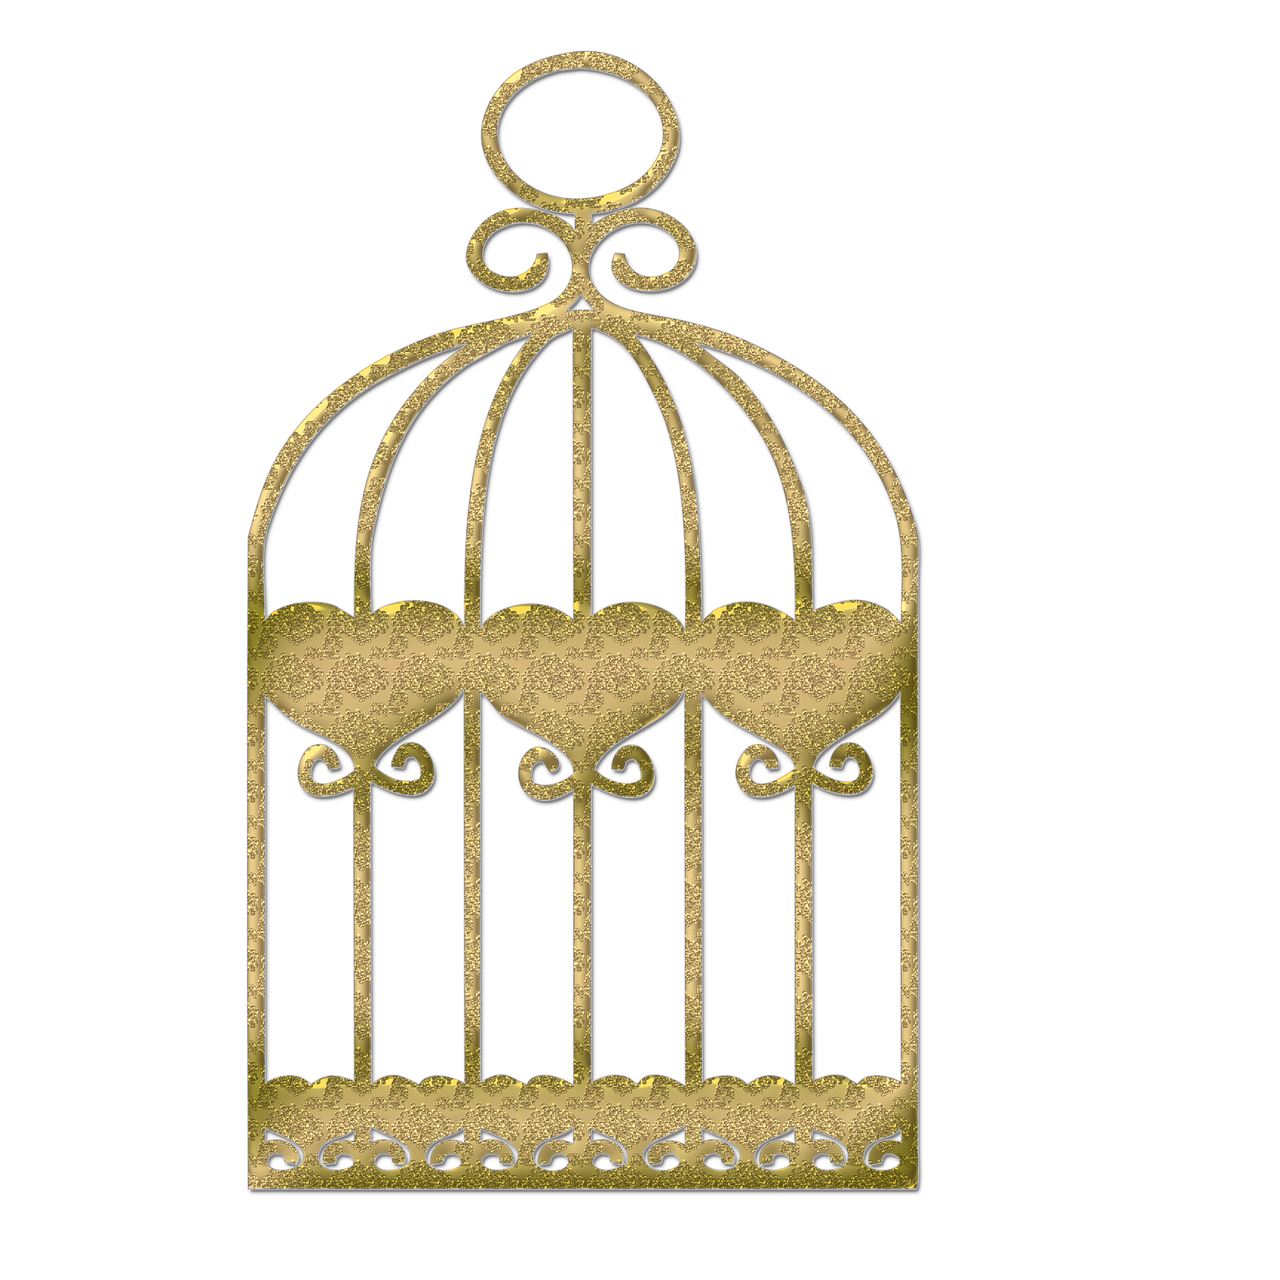 bird cage outline gold embossed free photo